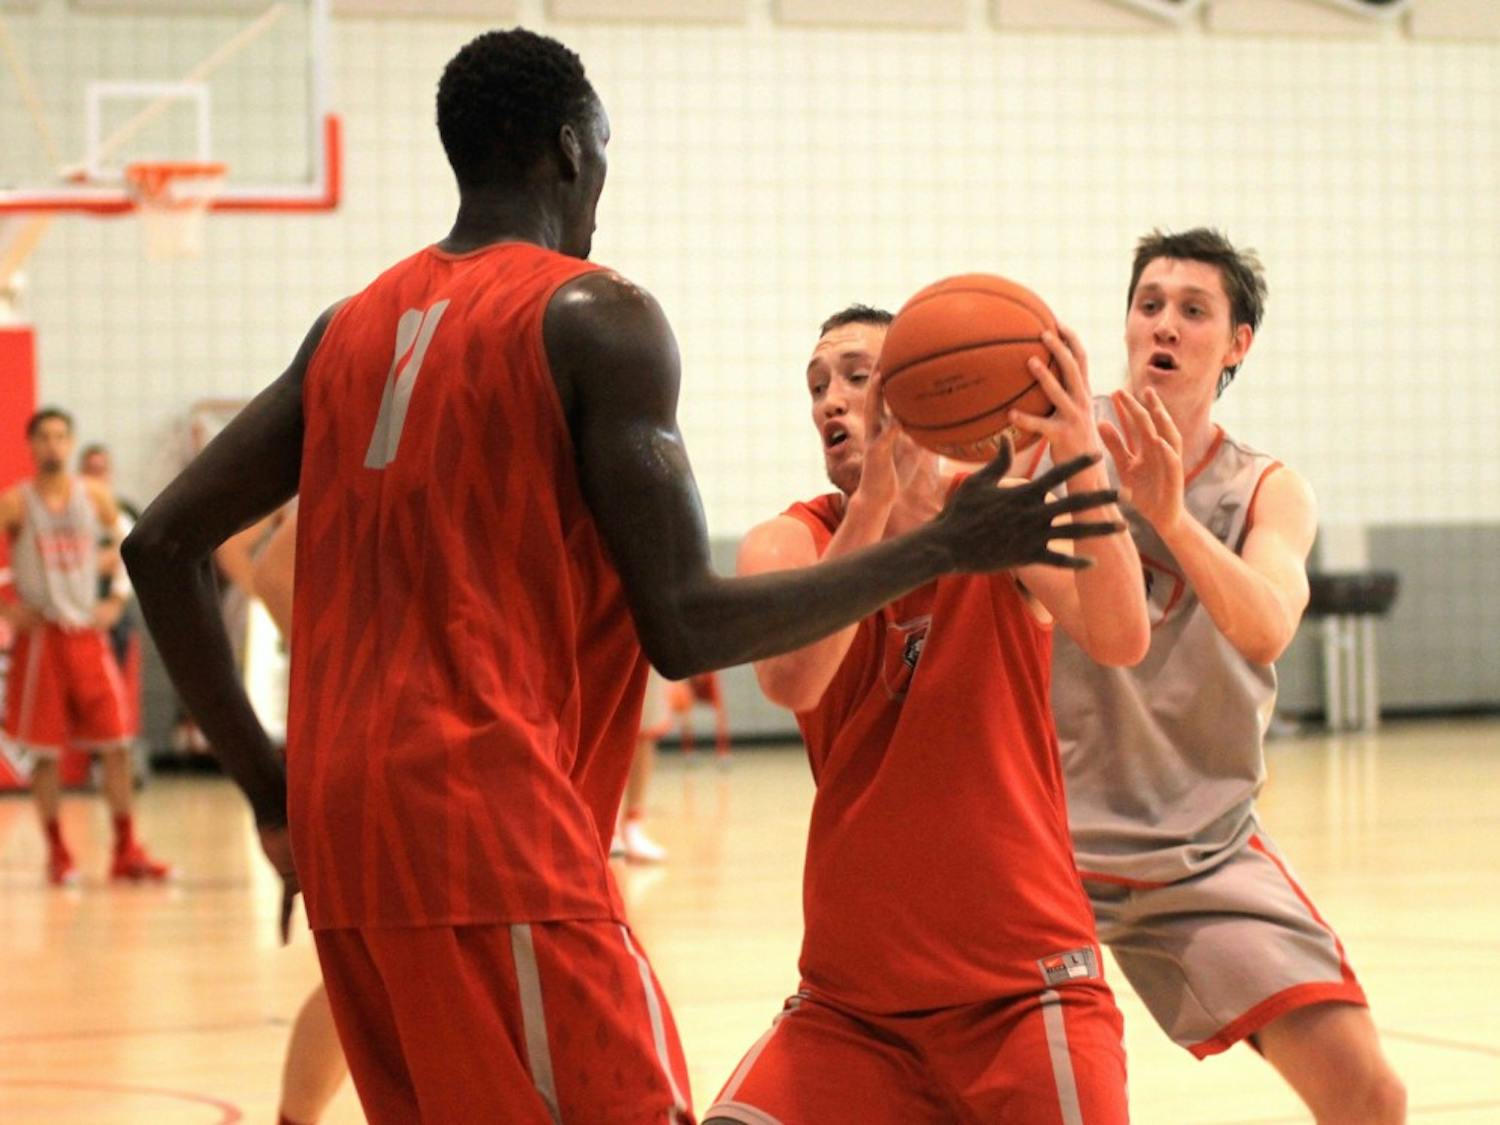 New Mexico's Cullen Neal, center, collects the ball under pressure from Obij Aget, left, under pressure from Joe Fursdinger during practice Tuesday afternoon at the Rudy Davalos Basketball Center. The Lobos released the schedule for the upcoming season on Tuesday, one that features games against seven NCAA tournament participants.